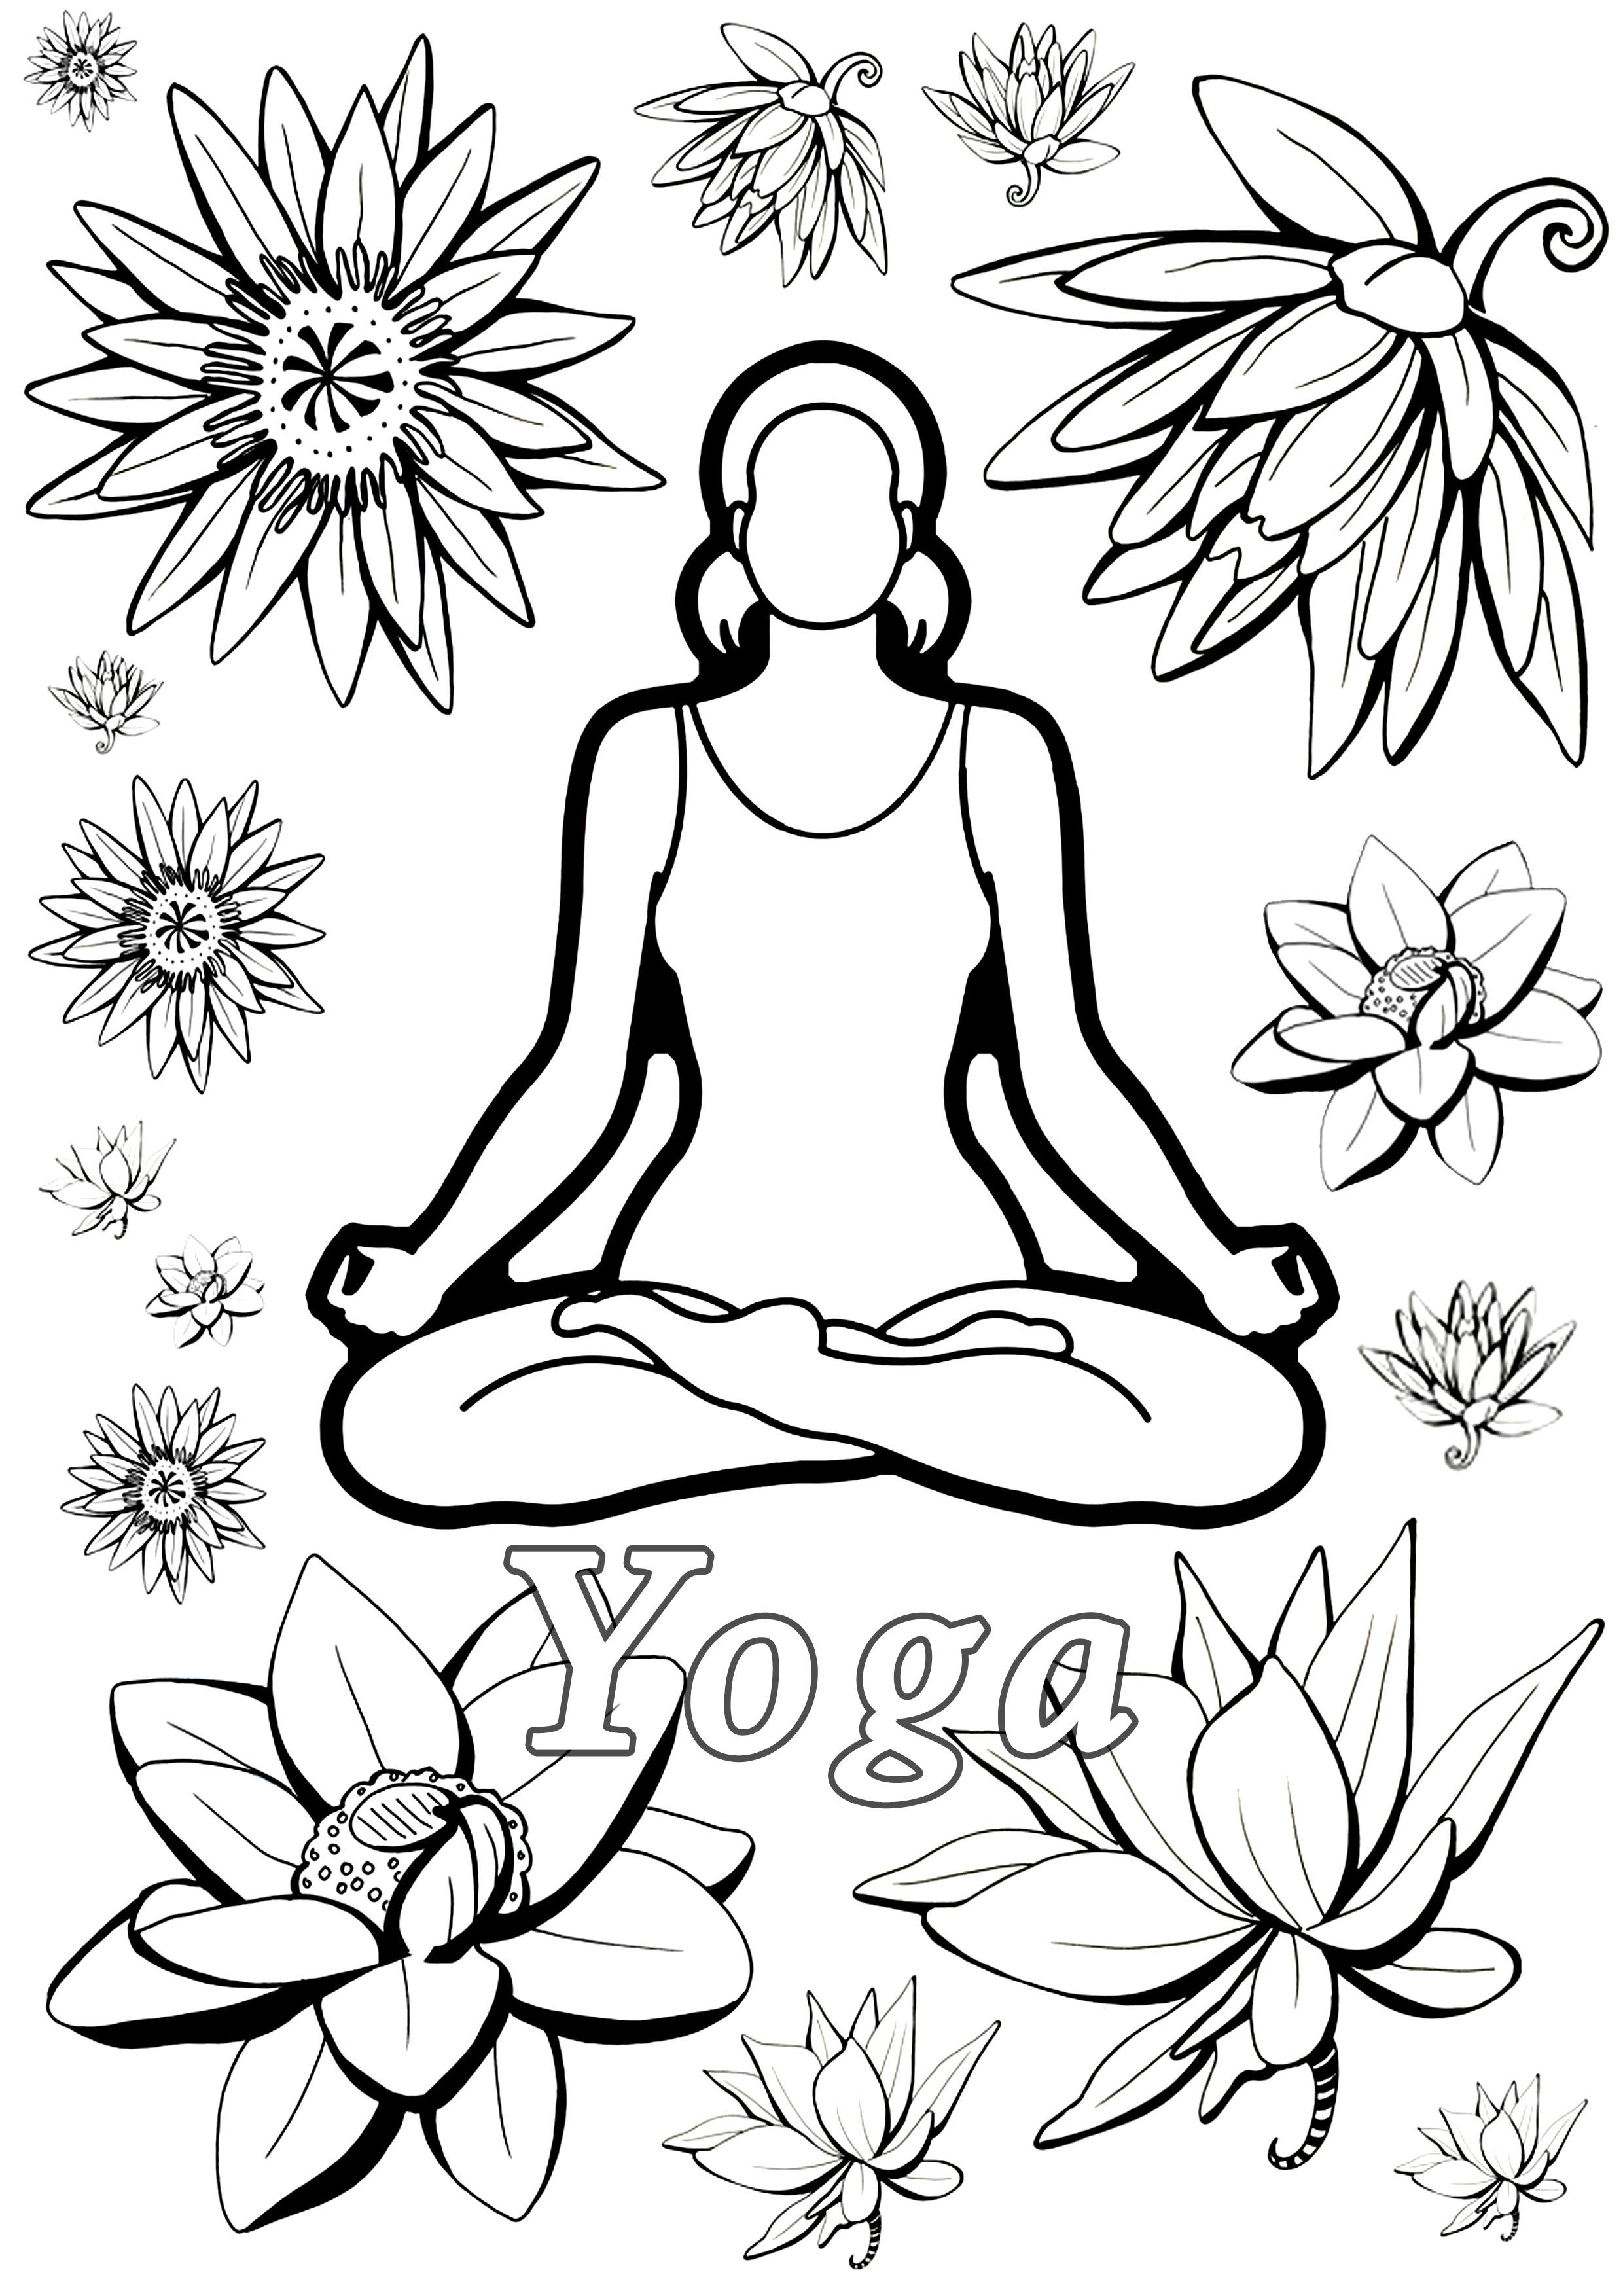 Mini Adult Coloring Book: Pocket-Sized Stress Relief and Mindful Meditation, Easy Flower Designs for On-the-Go Relaxation, Unique Zen Gift for Travel  and Daily Calm by Clio Voyage